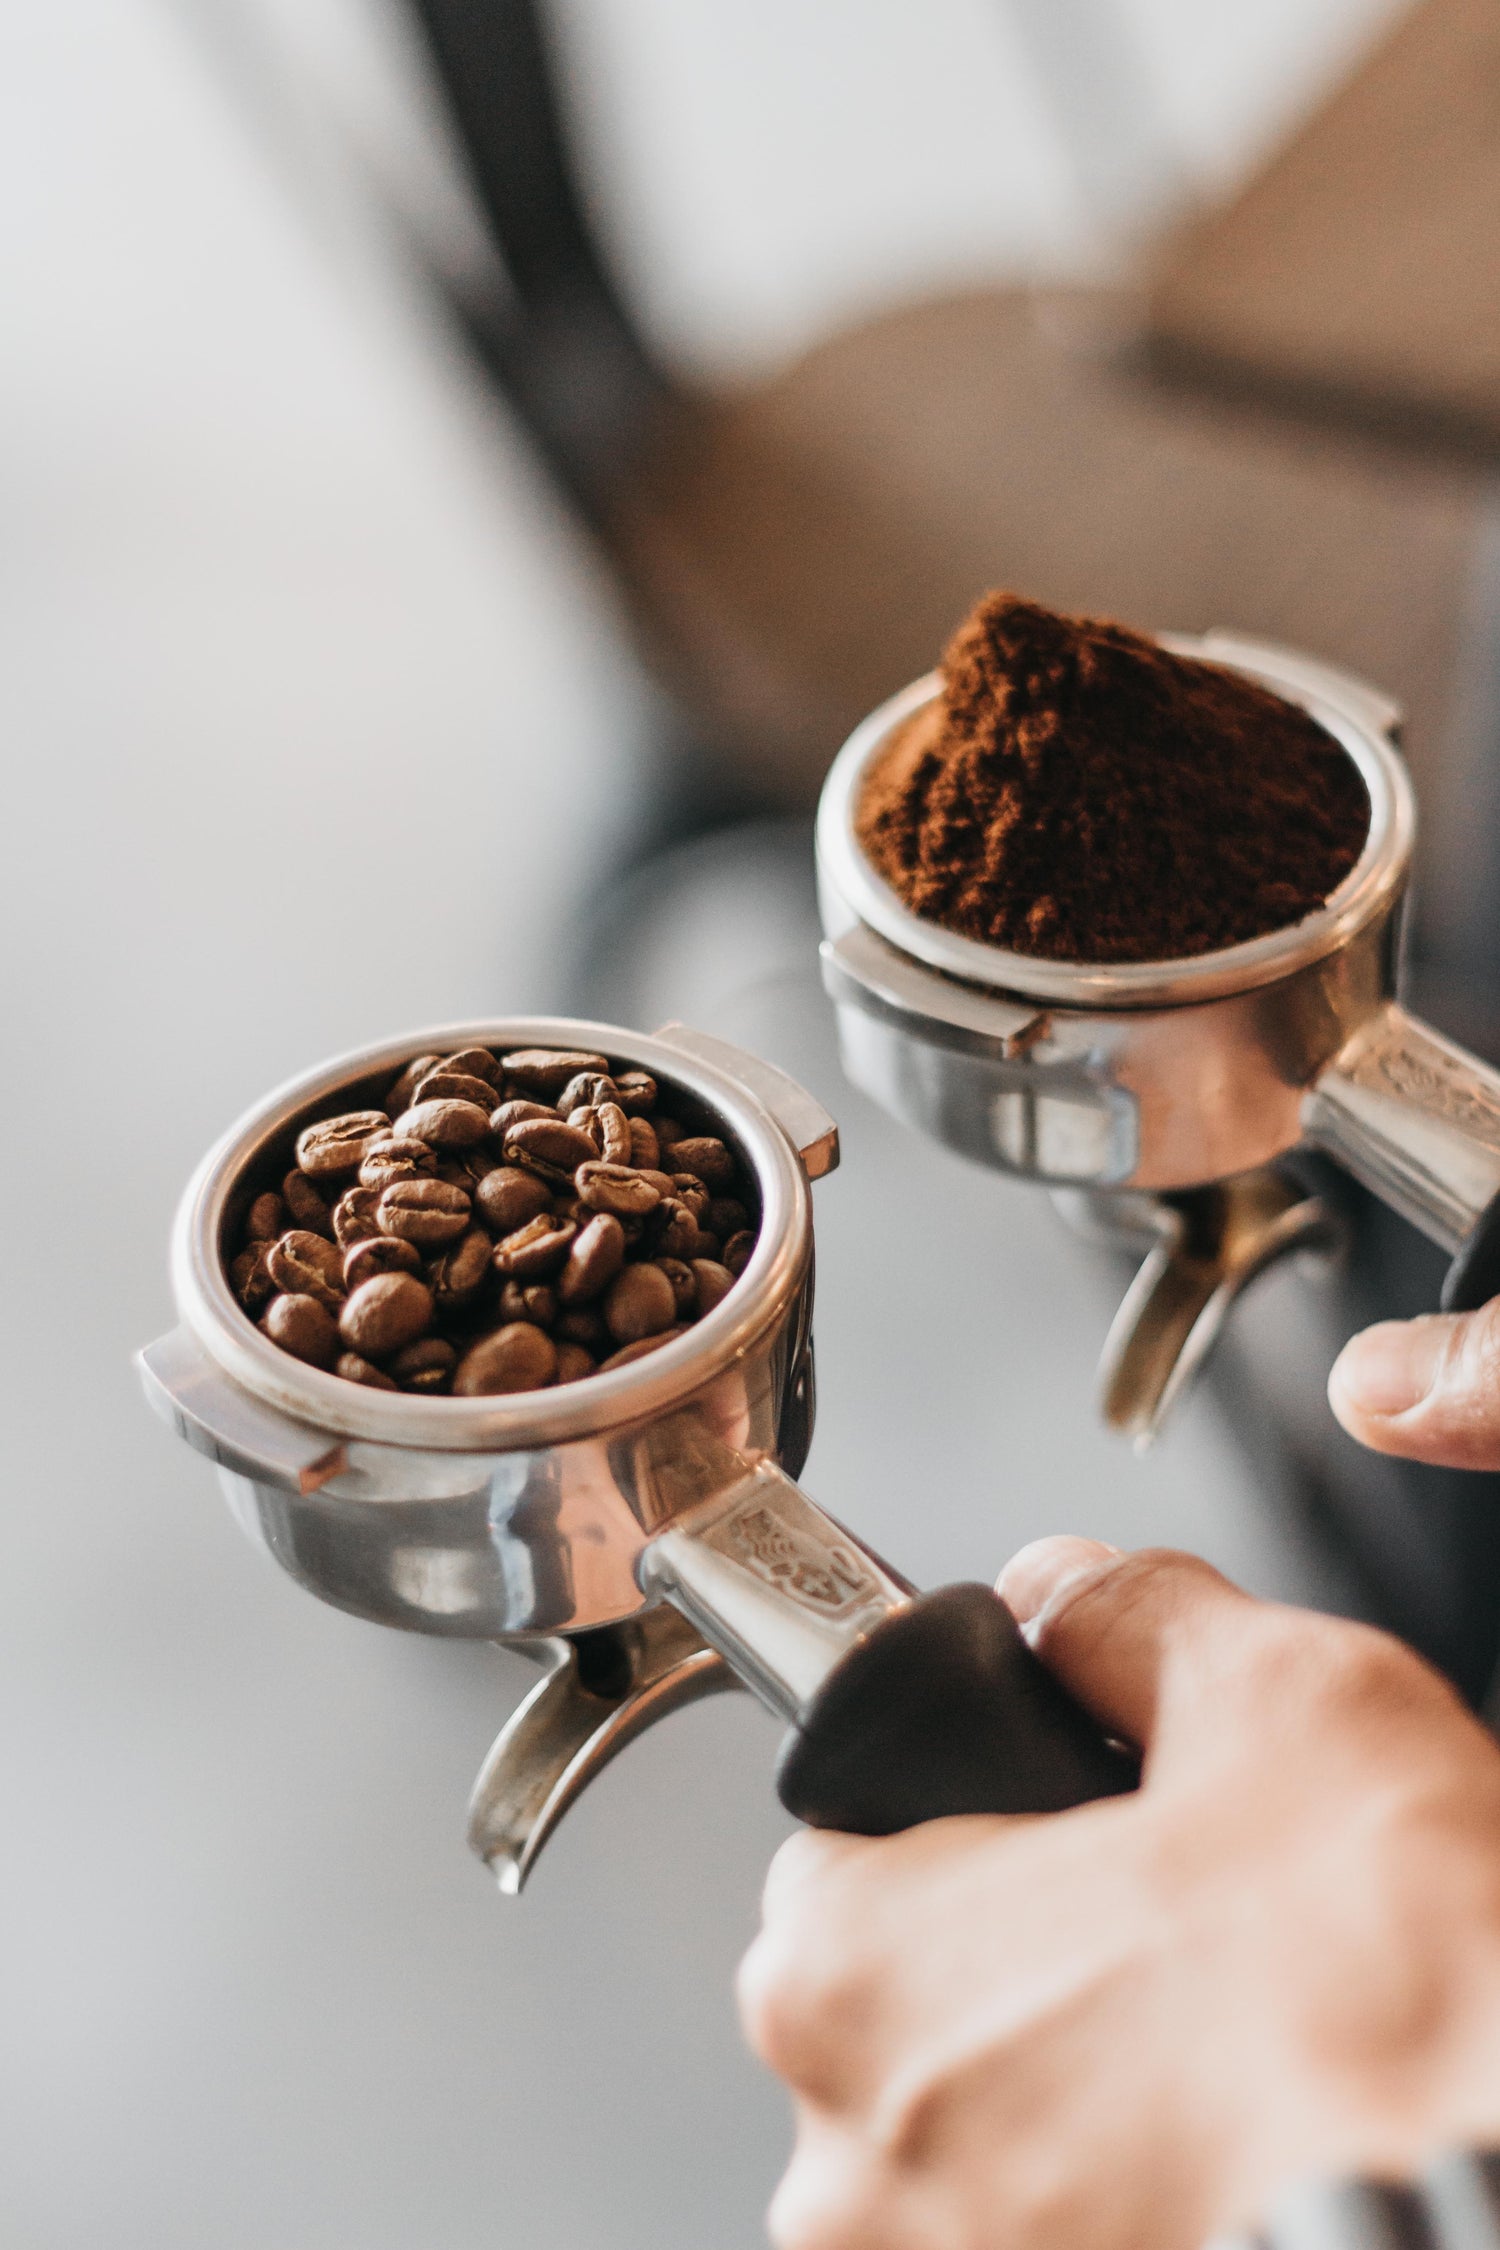 Roasted, Ground or Whole Coffee Beans, Which One Should You Buy?